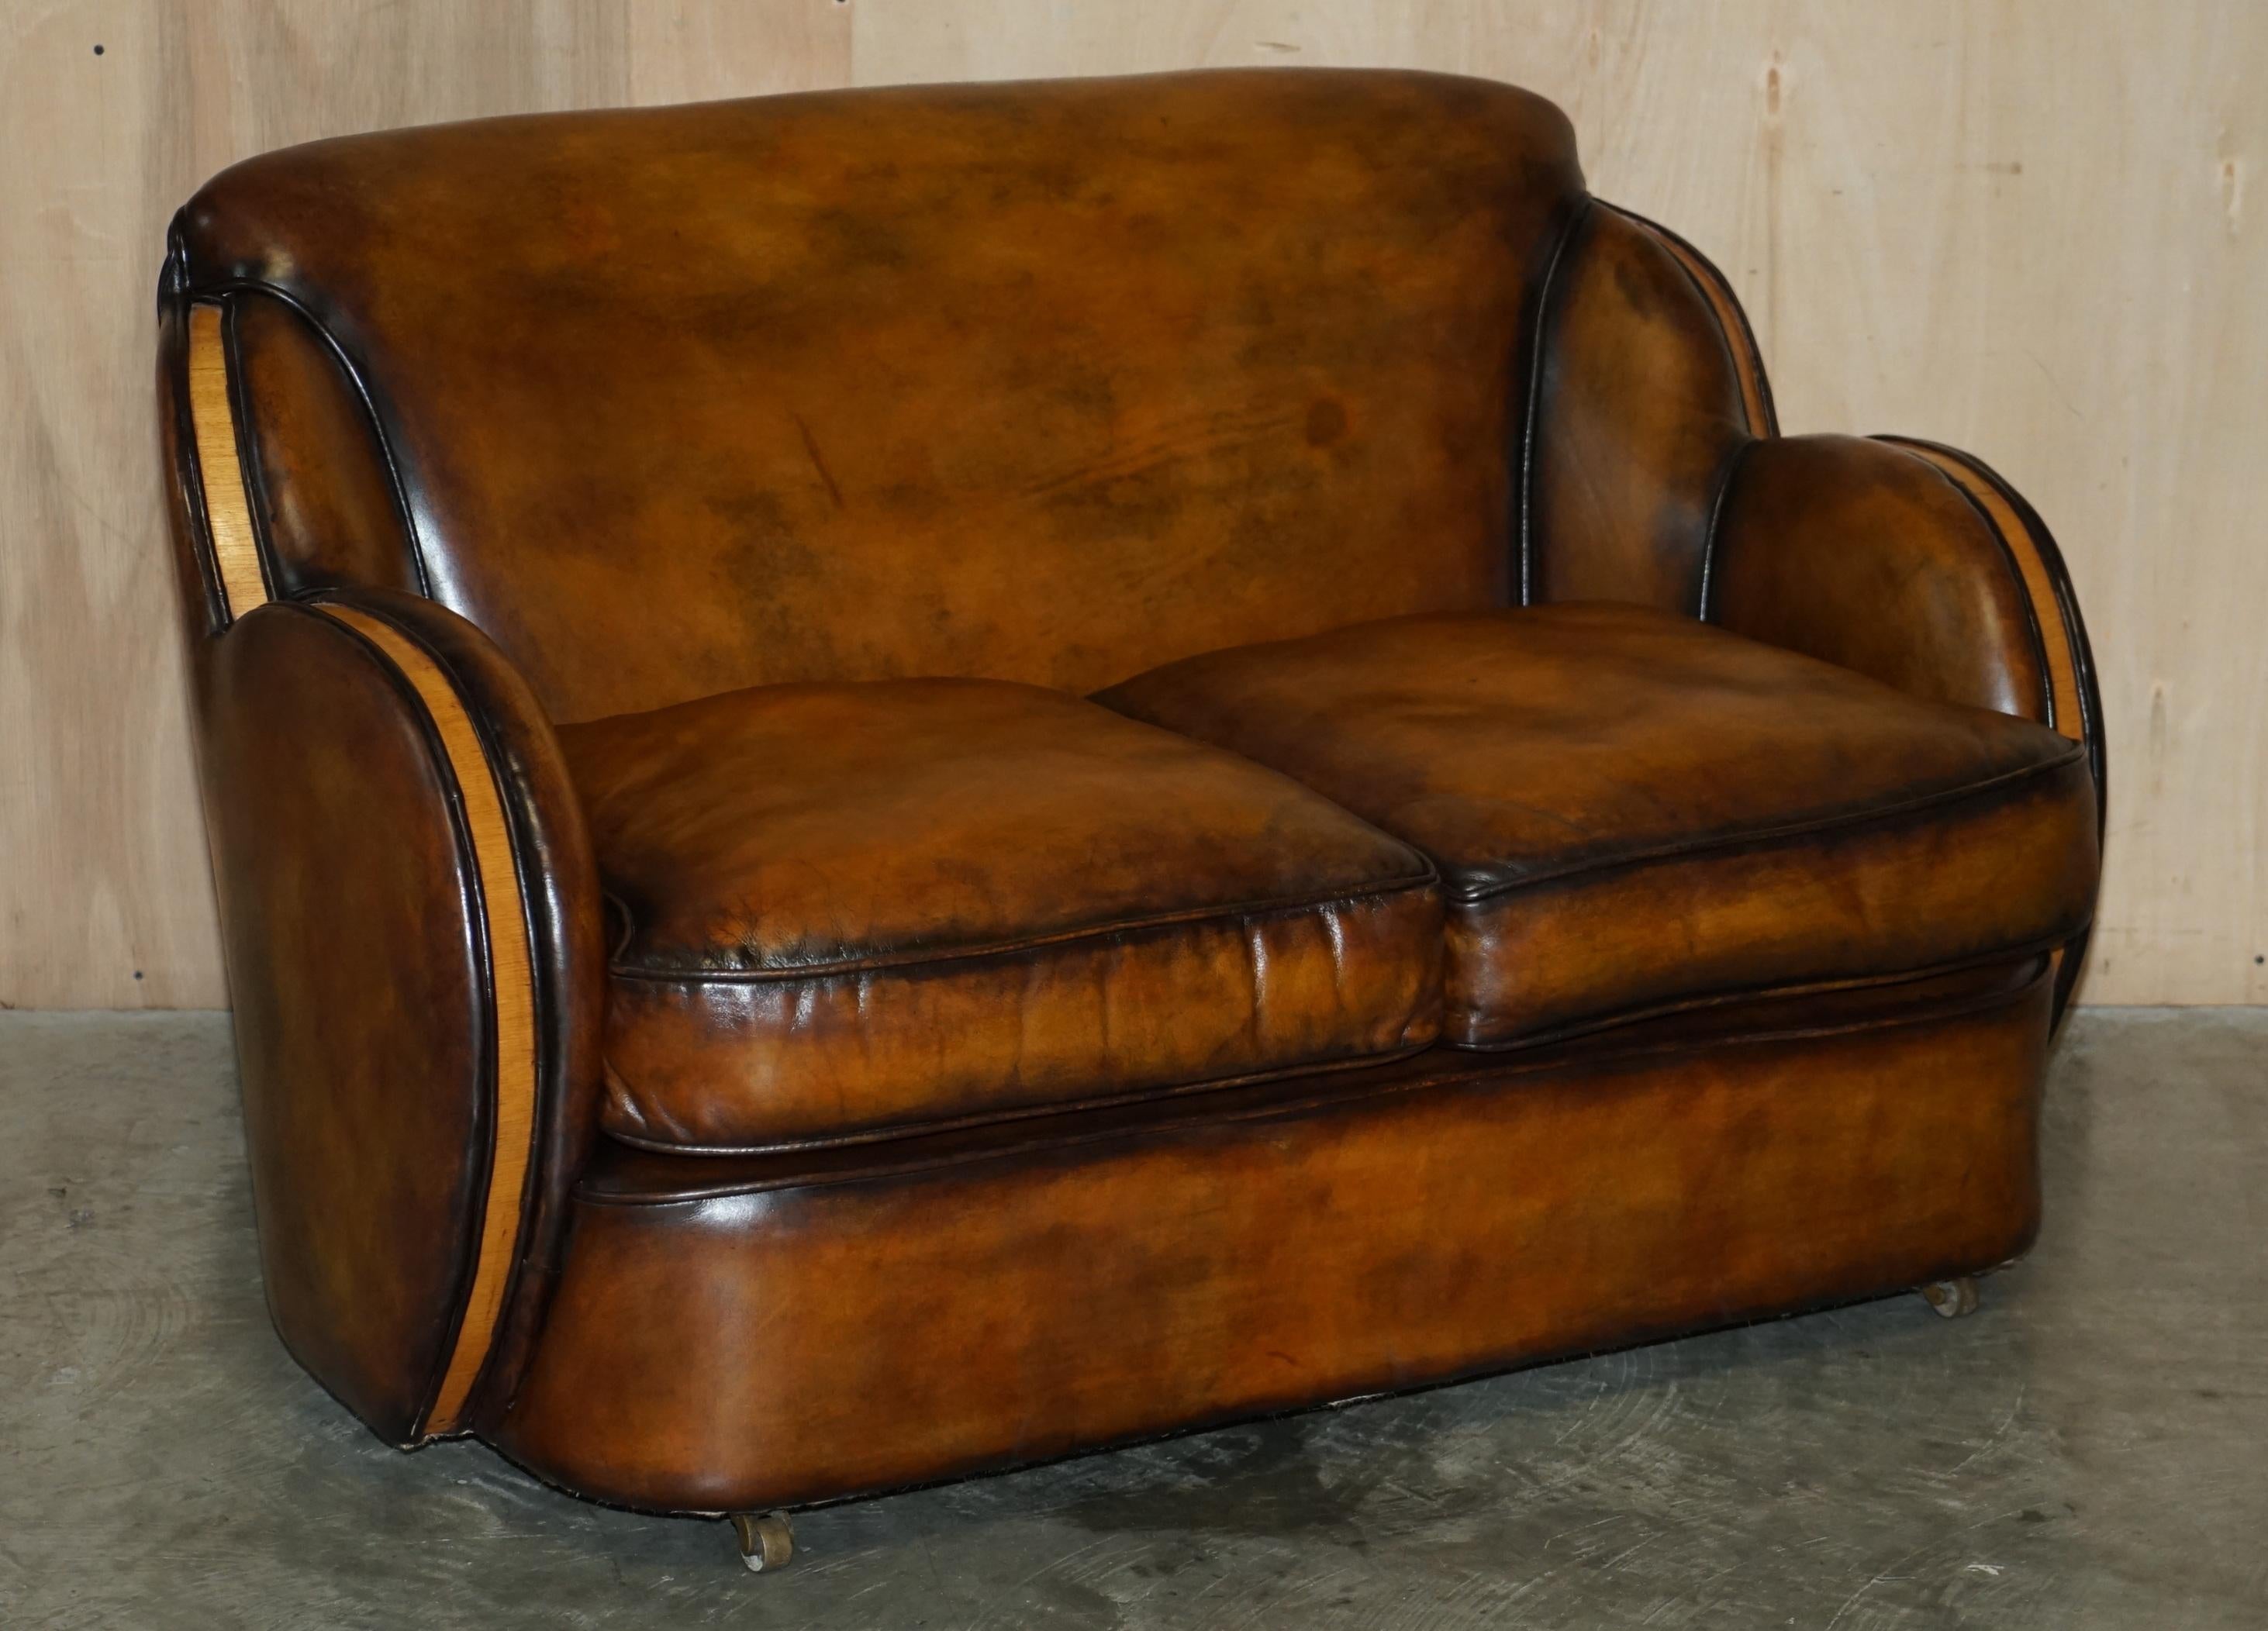 We are delighted to offer for sale this stunning pair of very rare Harry & Lou Epstein Art Deco two seat Cloud sofas with Birch frames and one of a kind, hand dyed brown leather upholstery.

A very stylish and decorative pairing. The birch panels